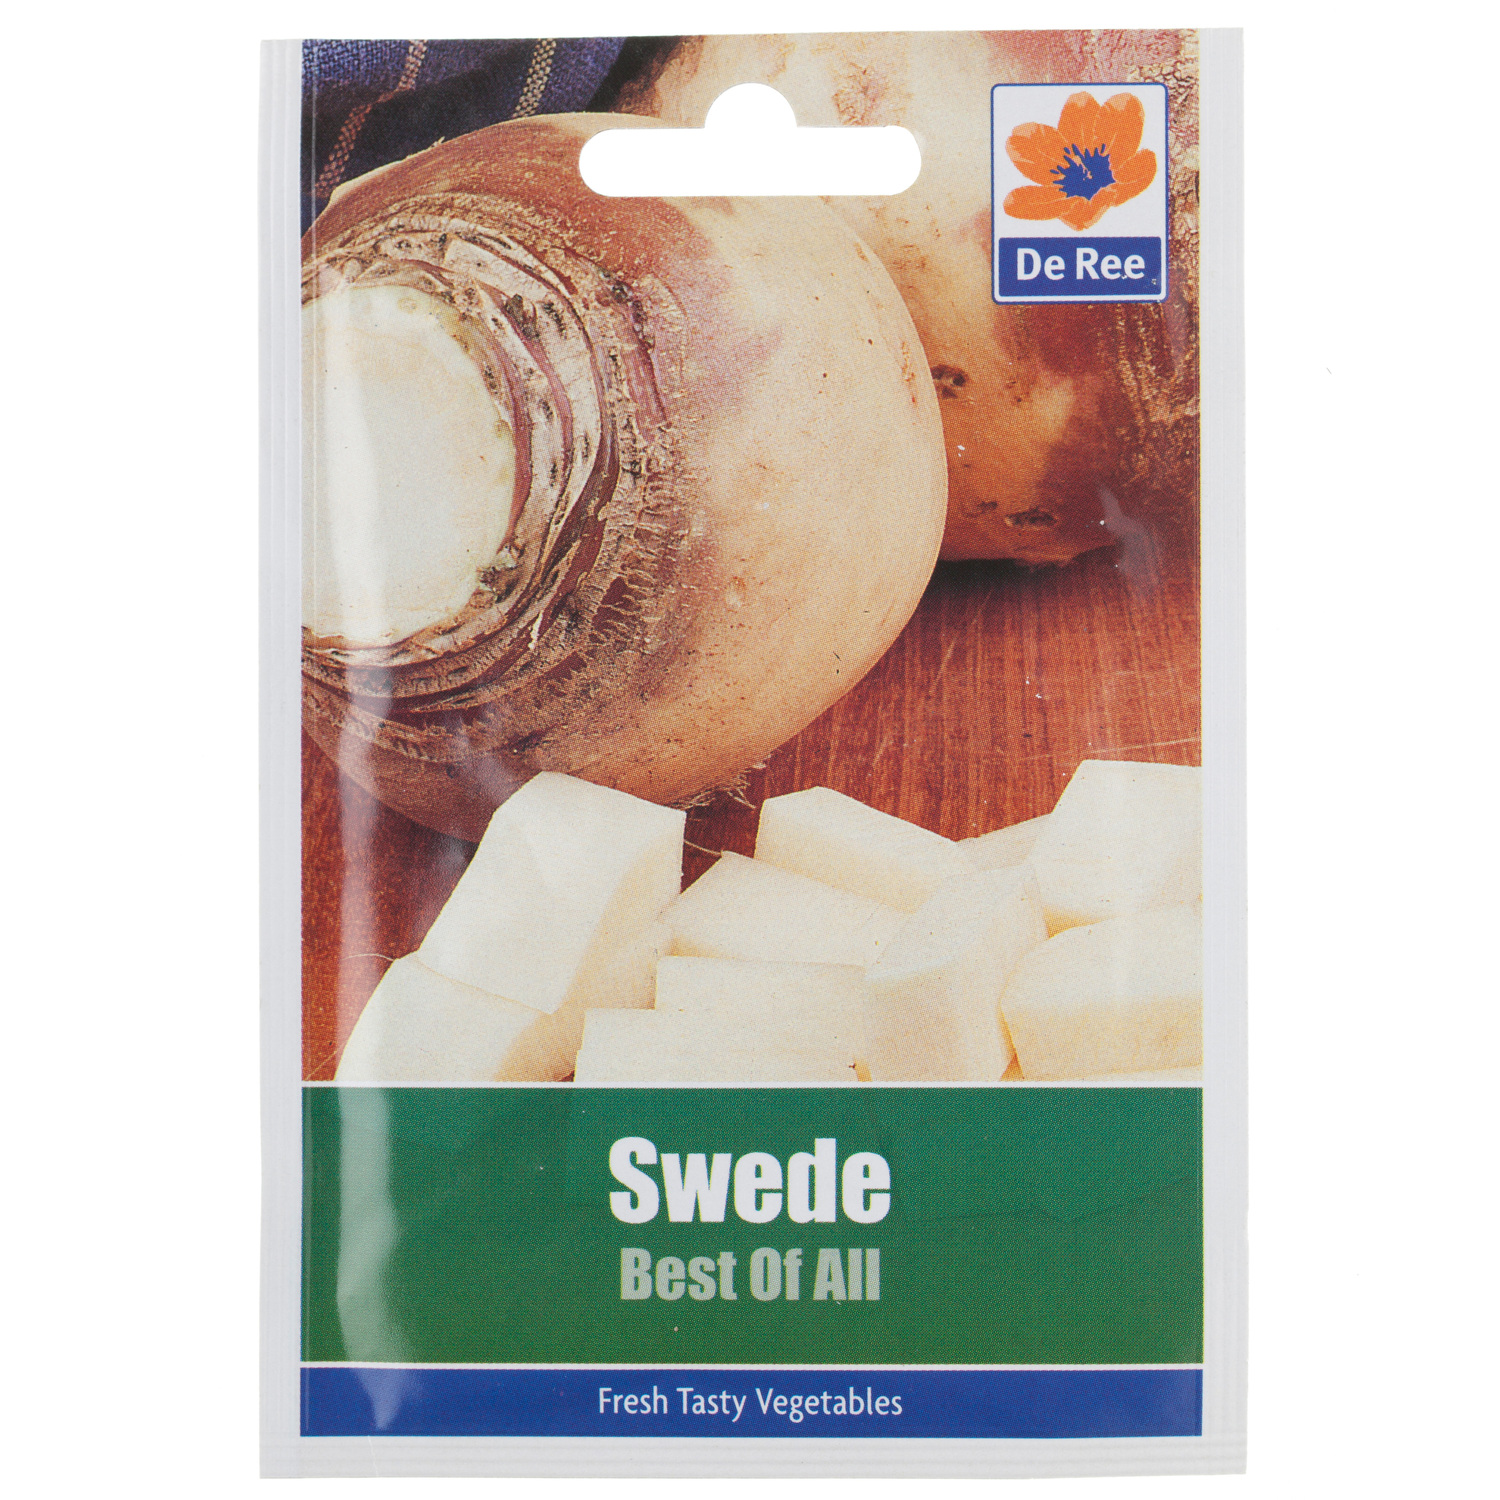 Swede Best Of All Seed Packet Image